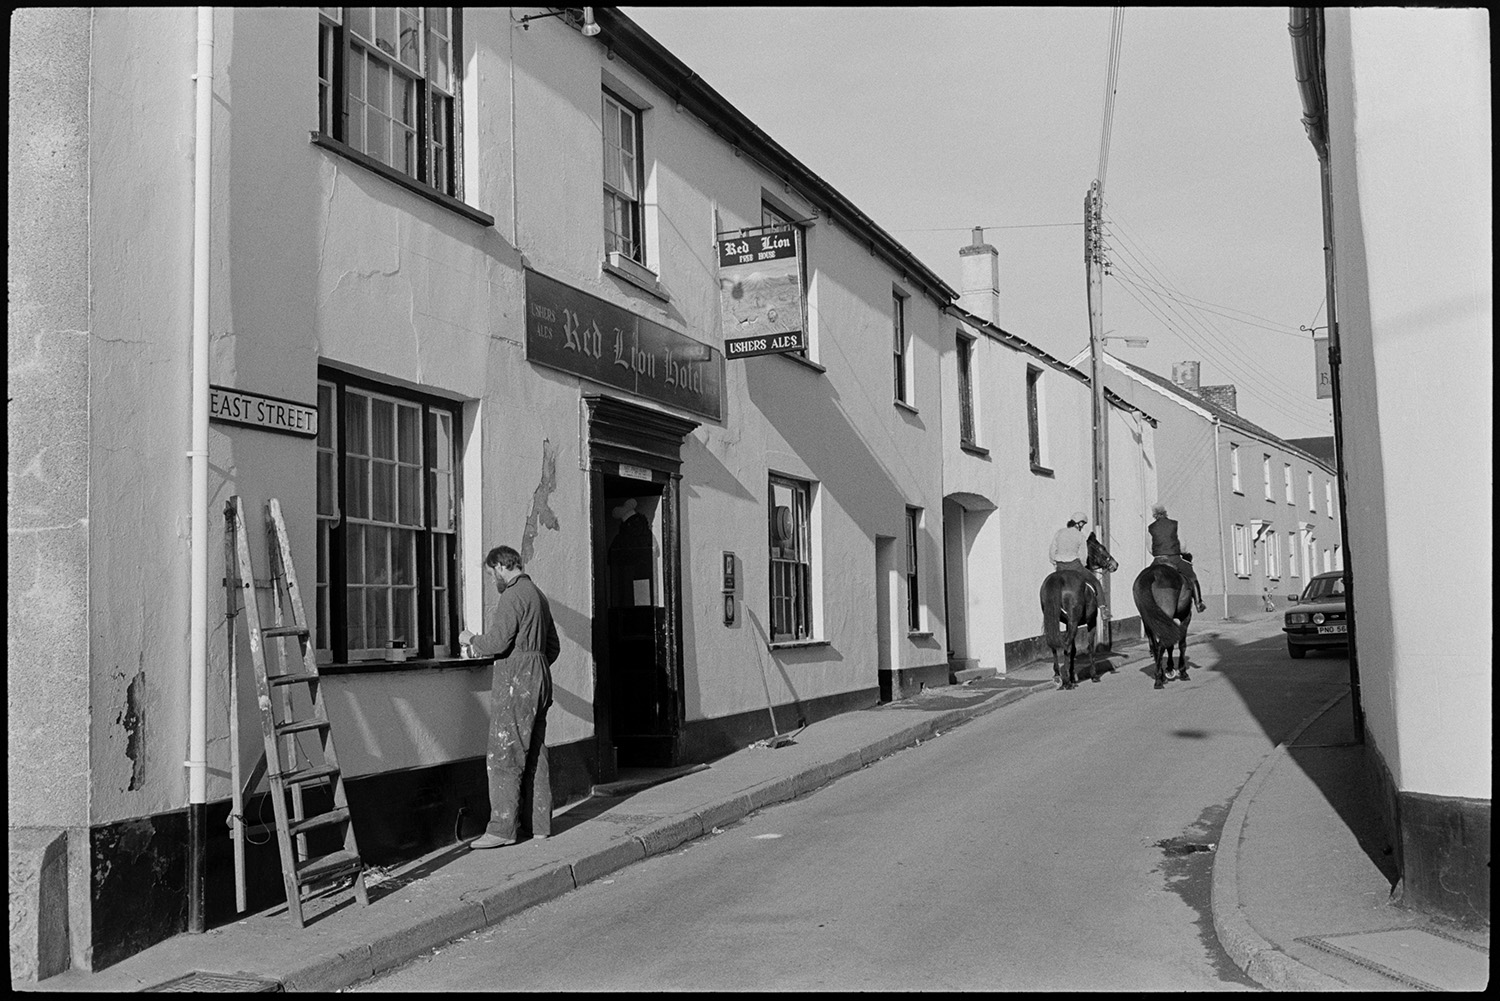 Street scenes with painter working on window, cyclists and passers by. Public house. 
[A man painting the window frames of the Red Lion Hotel  in East Street, Chulmleigh. His ladder is lent against the wall next to him. Two mounted horse riders can be seen further up the street.]